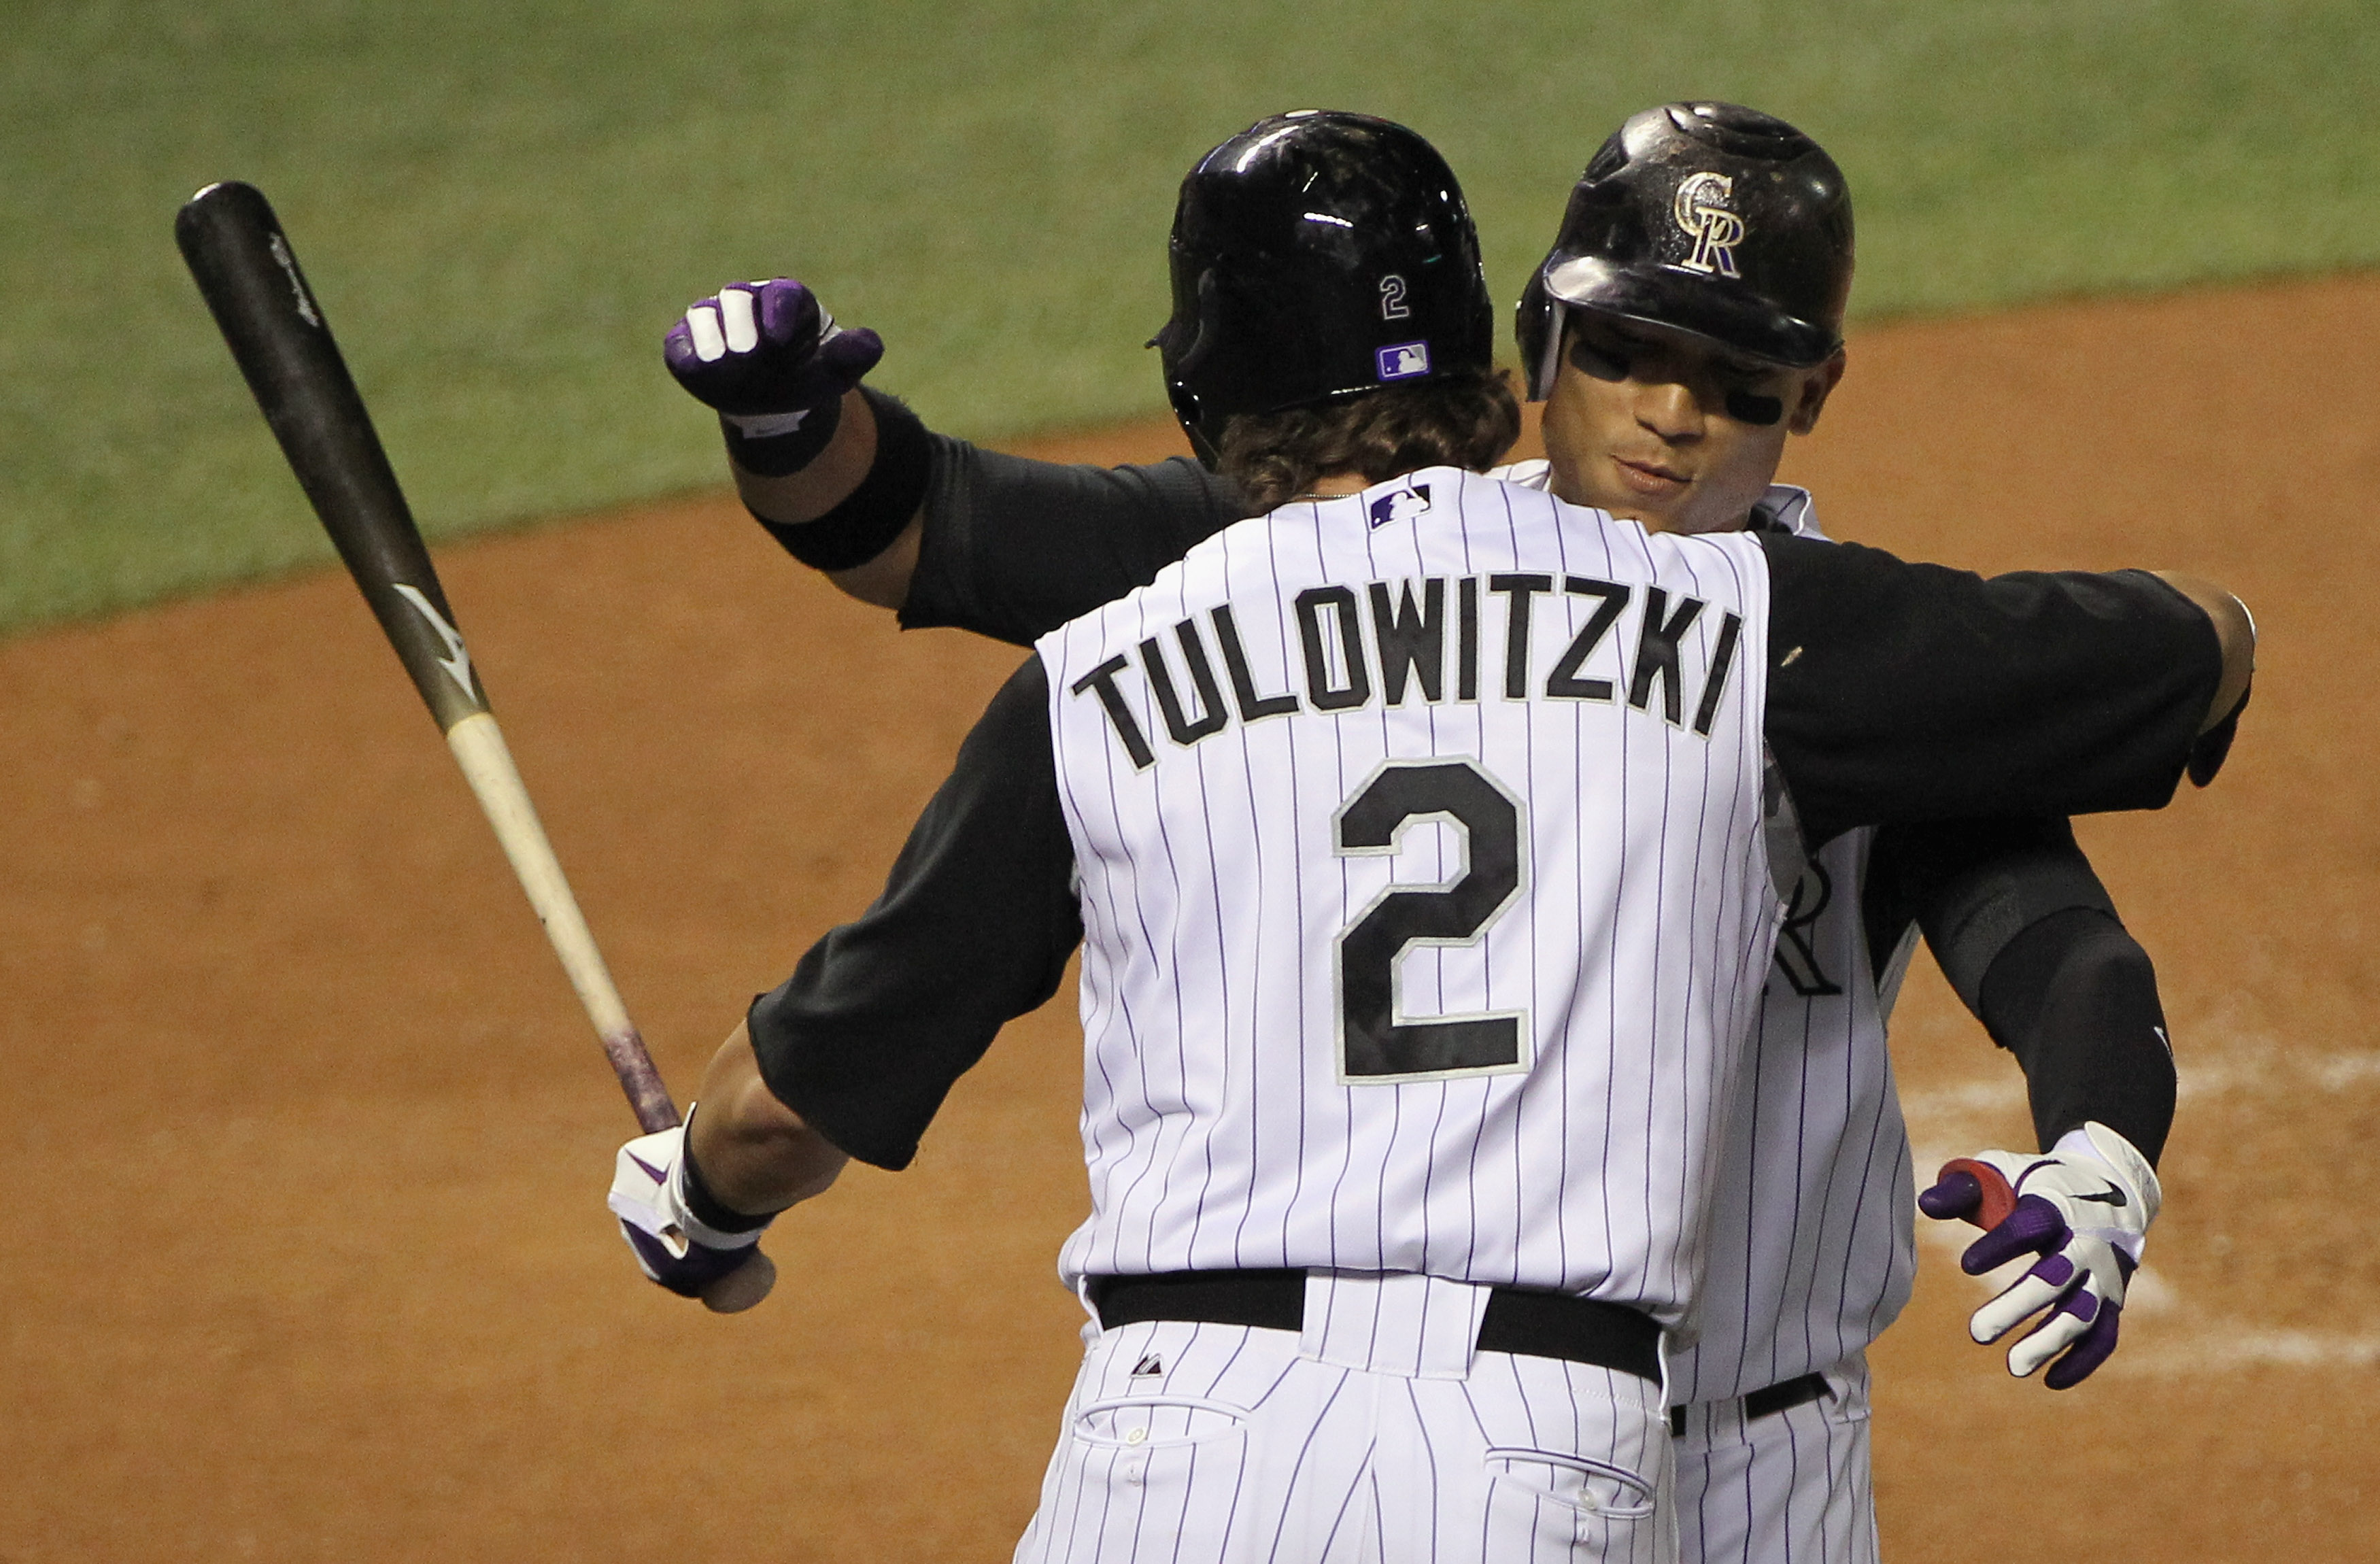 MLB Preview 2011: Looking at Troy Tulowitzki and the Colorado